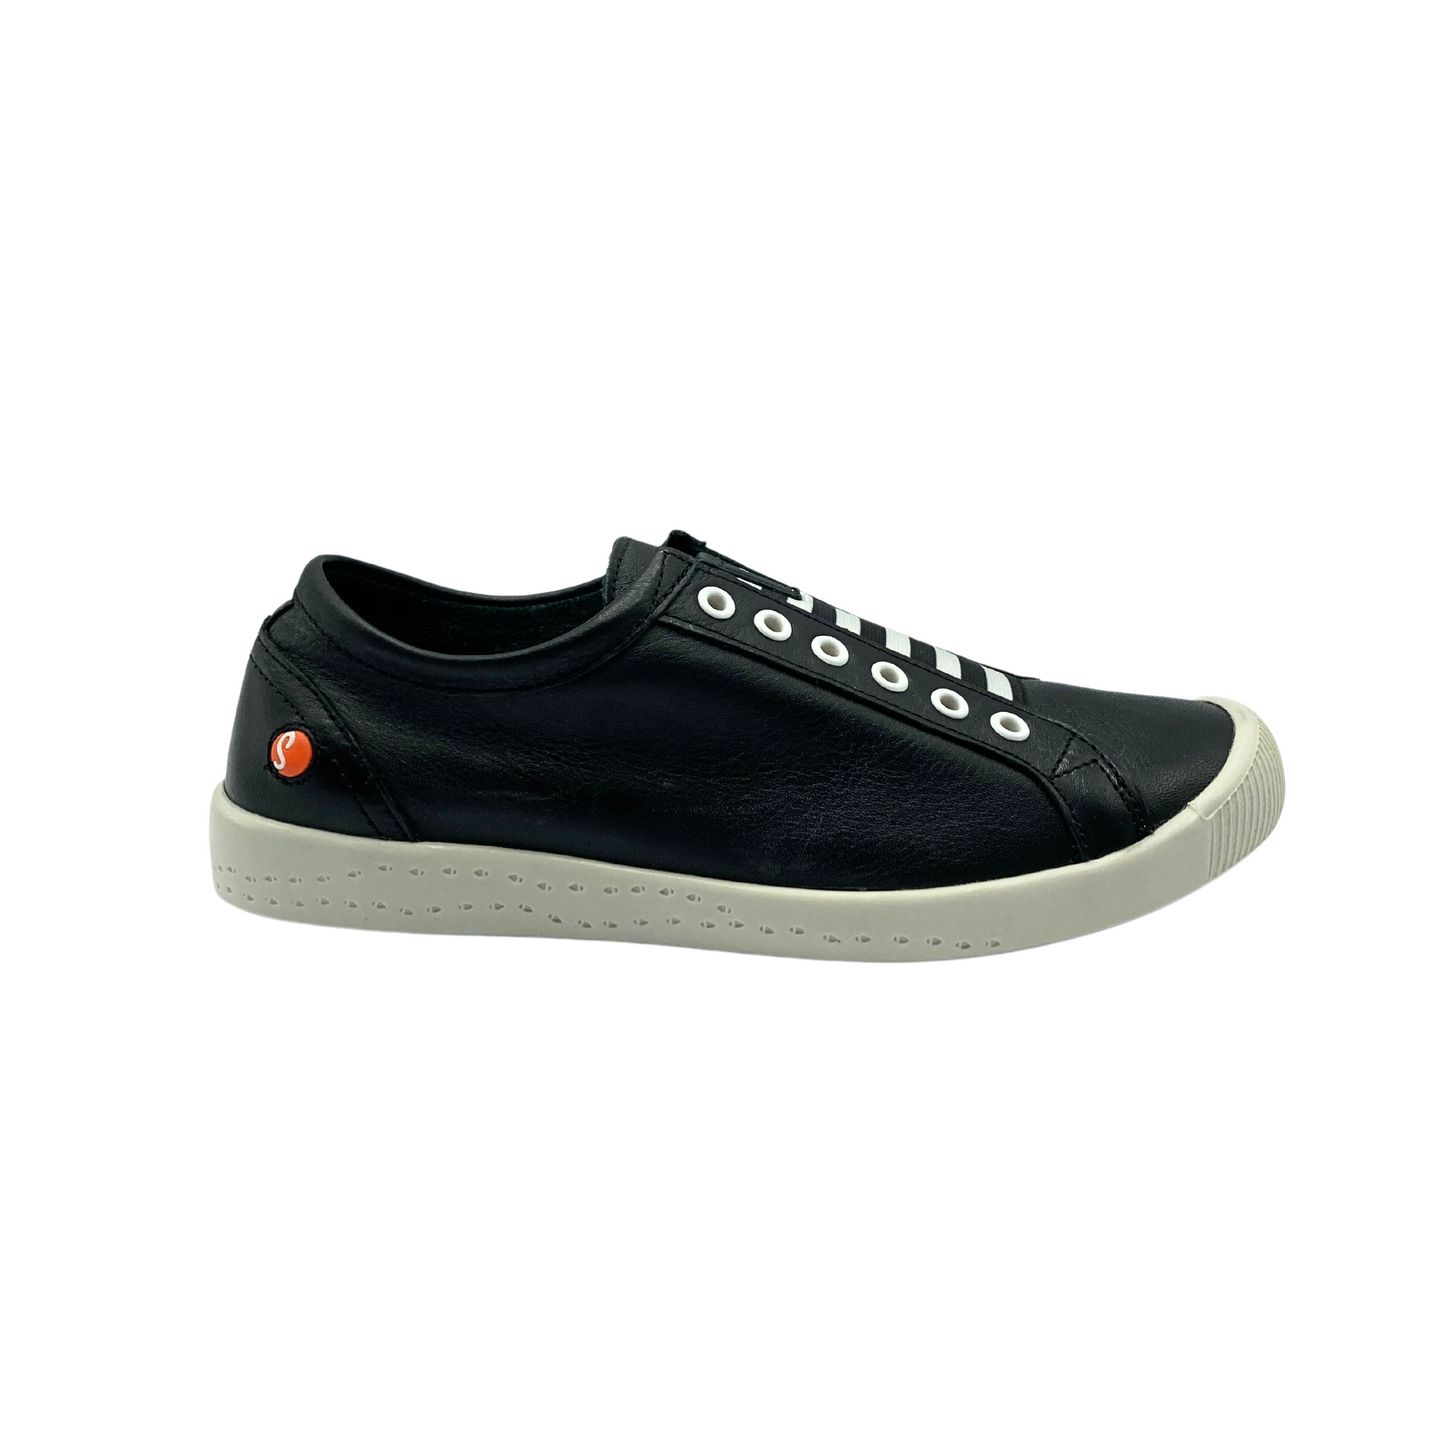 Outside view of black leather slip on sneaker.  White elastic laces and grommets in front.  Rubber sole